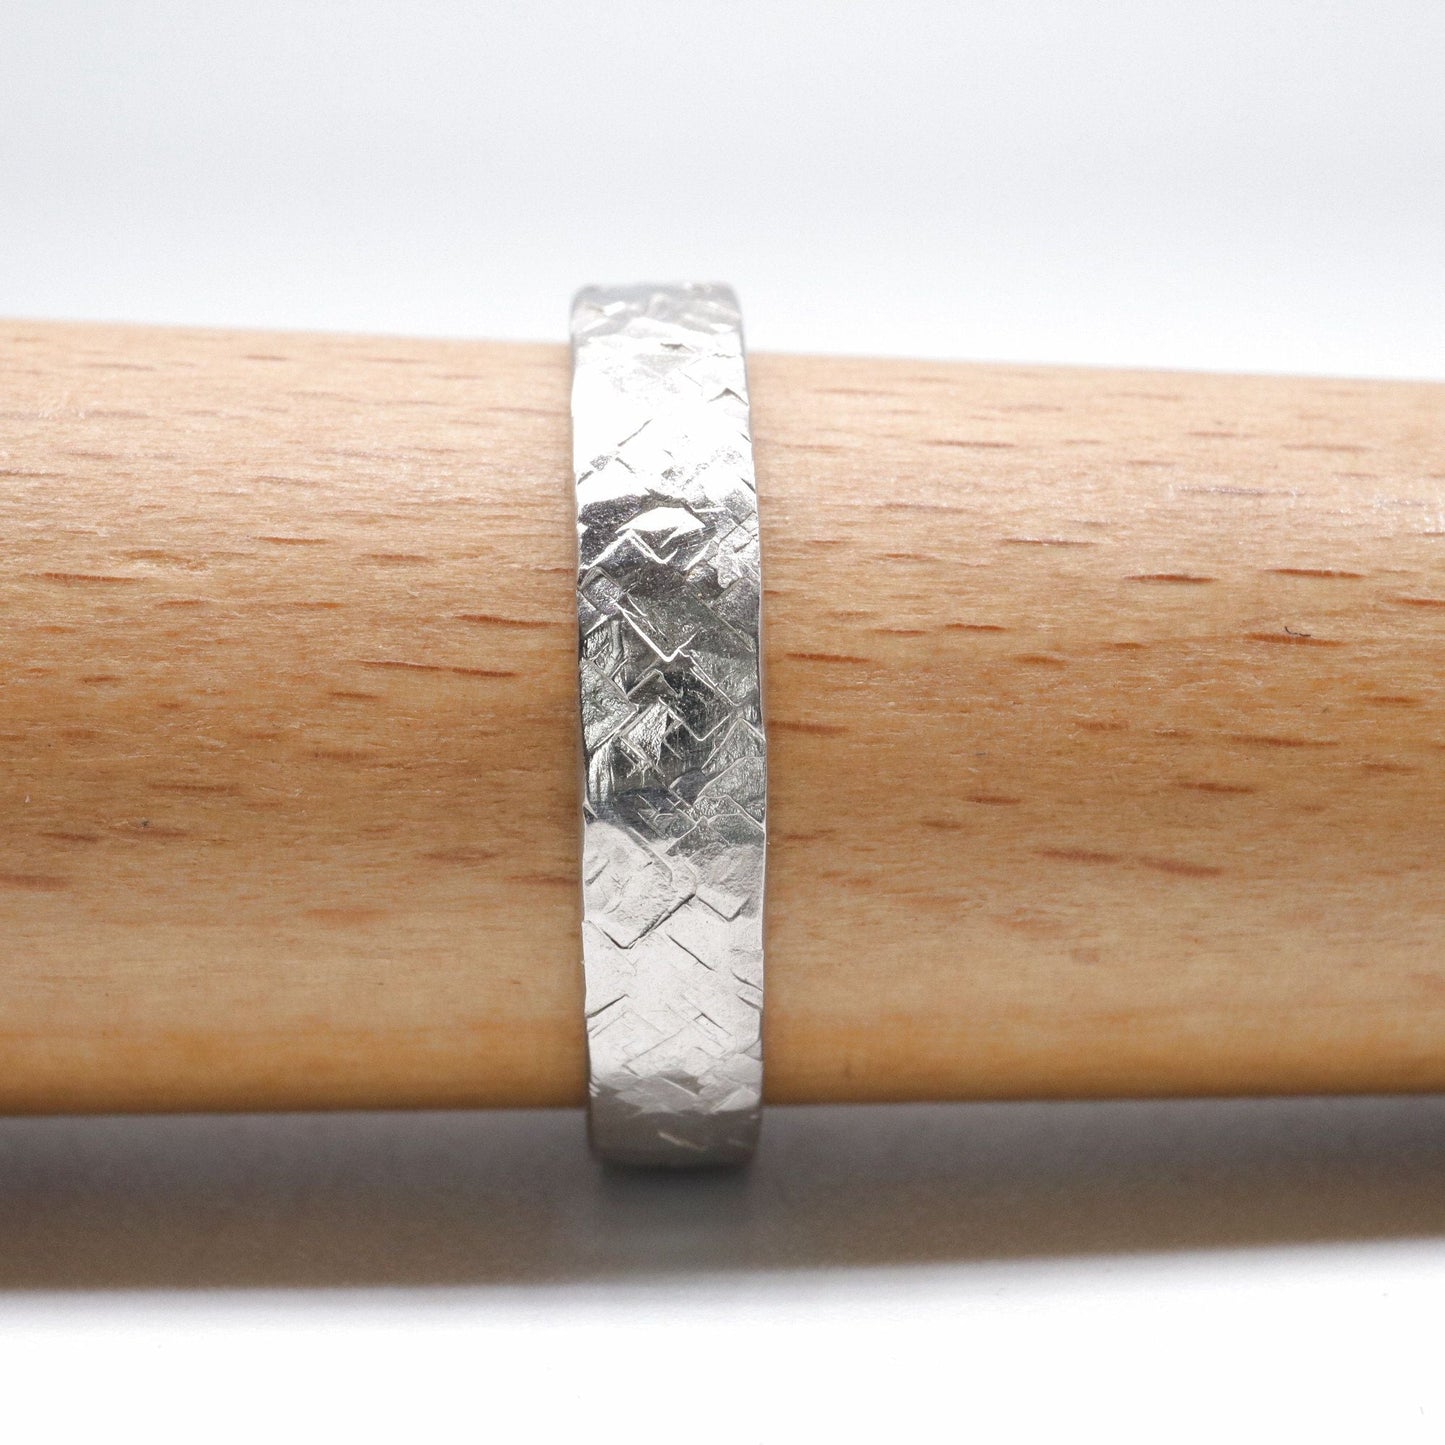 Narrow silver wedding ring, Kendal design rustic hammered style for a woman or man